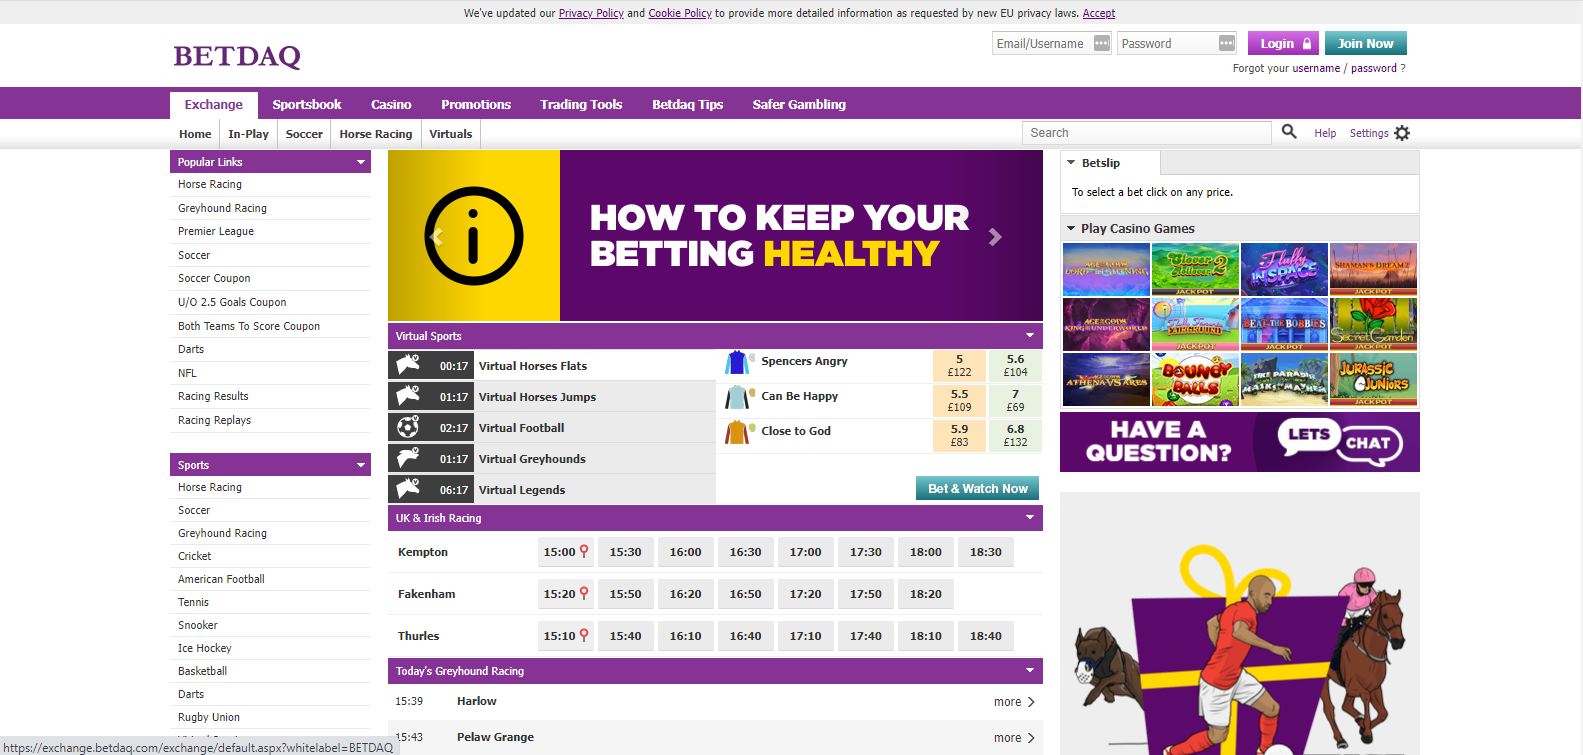 Official website of Betdaq betting exchange with the latest information